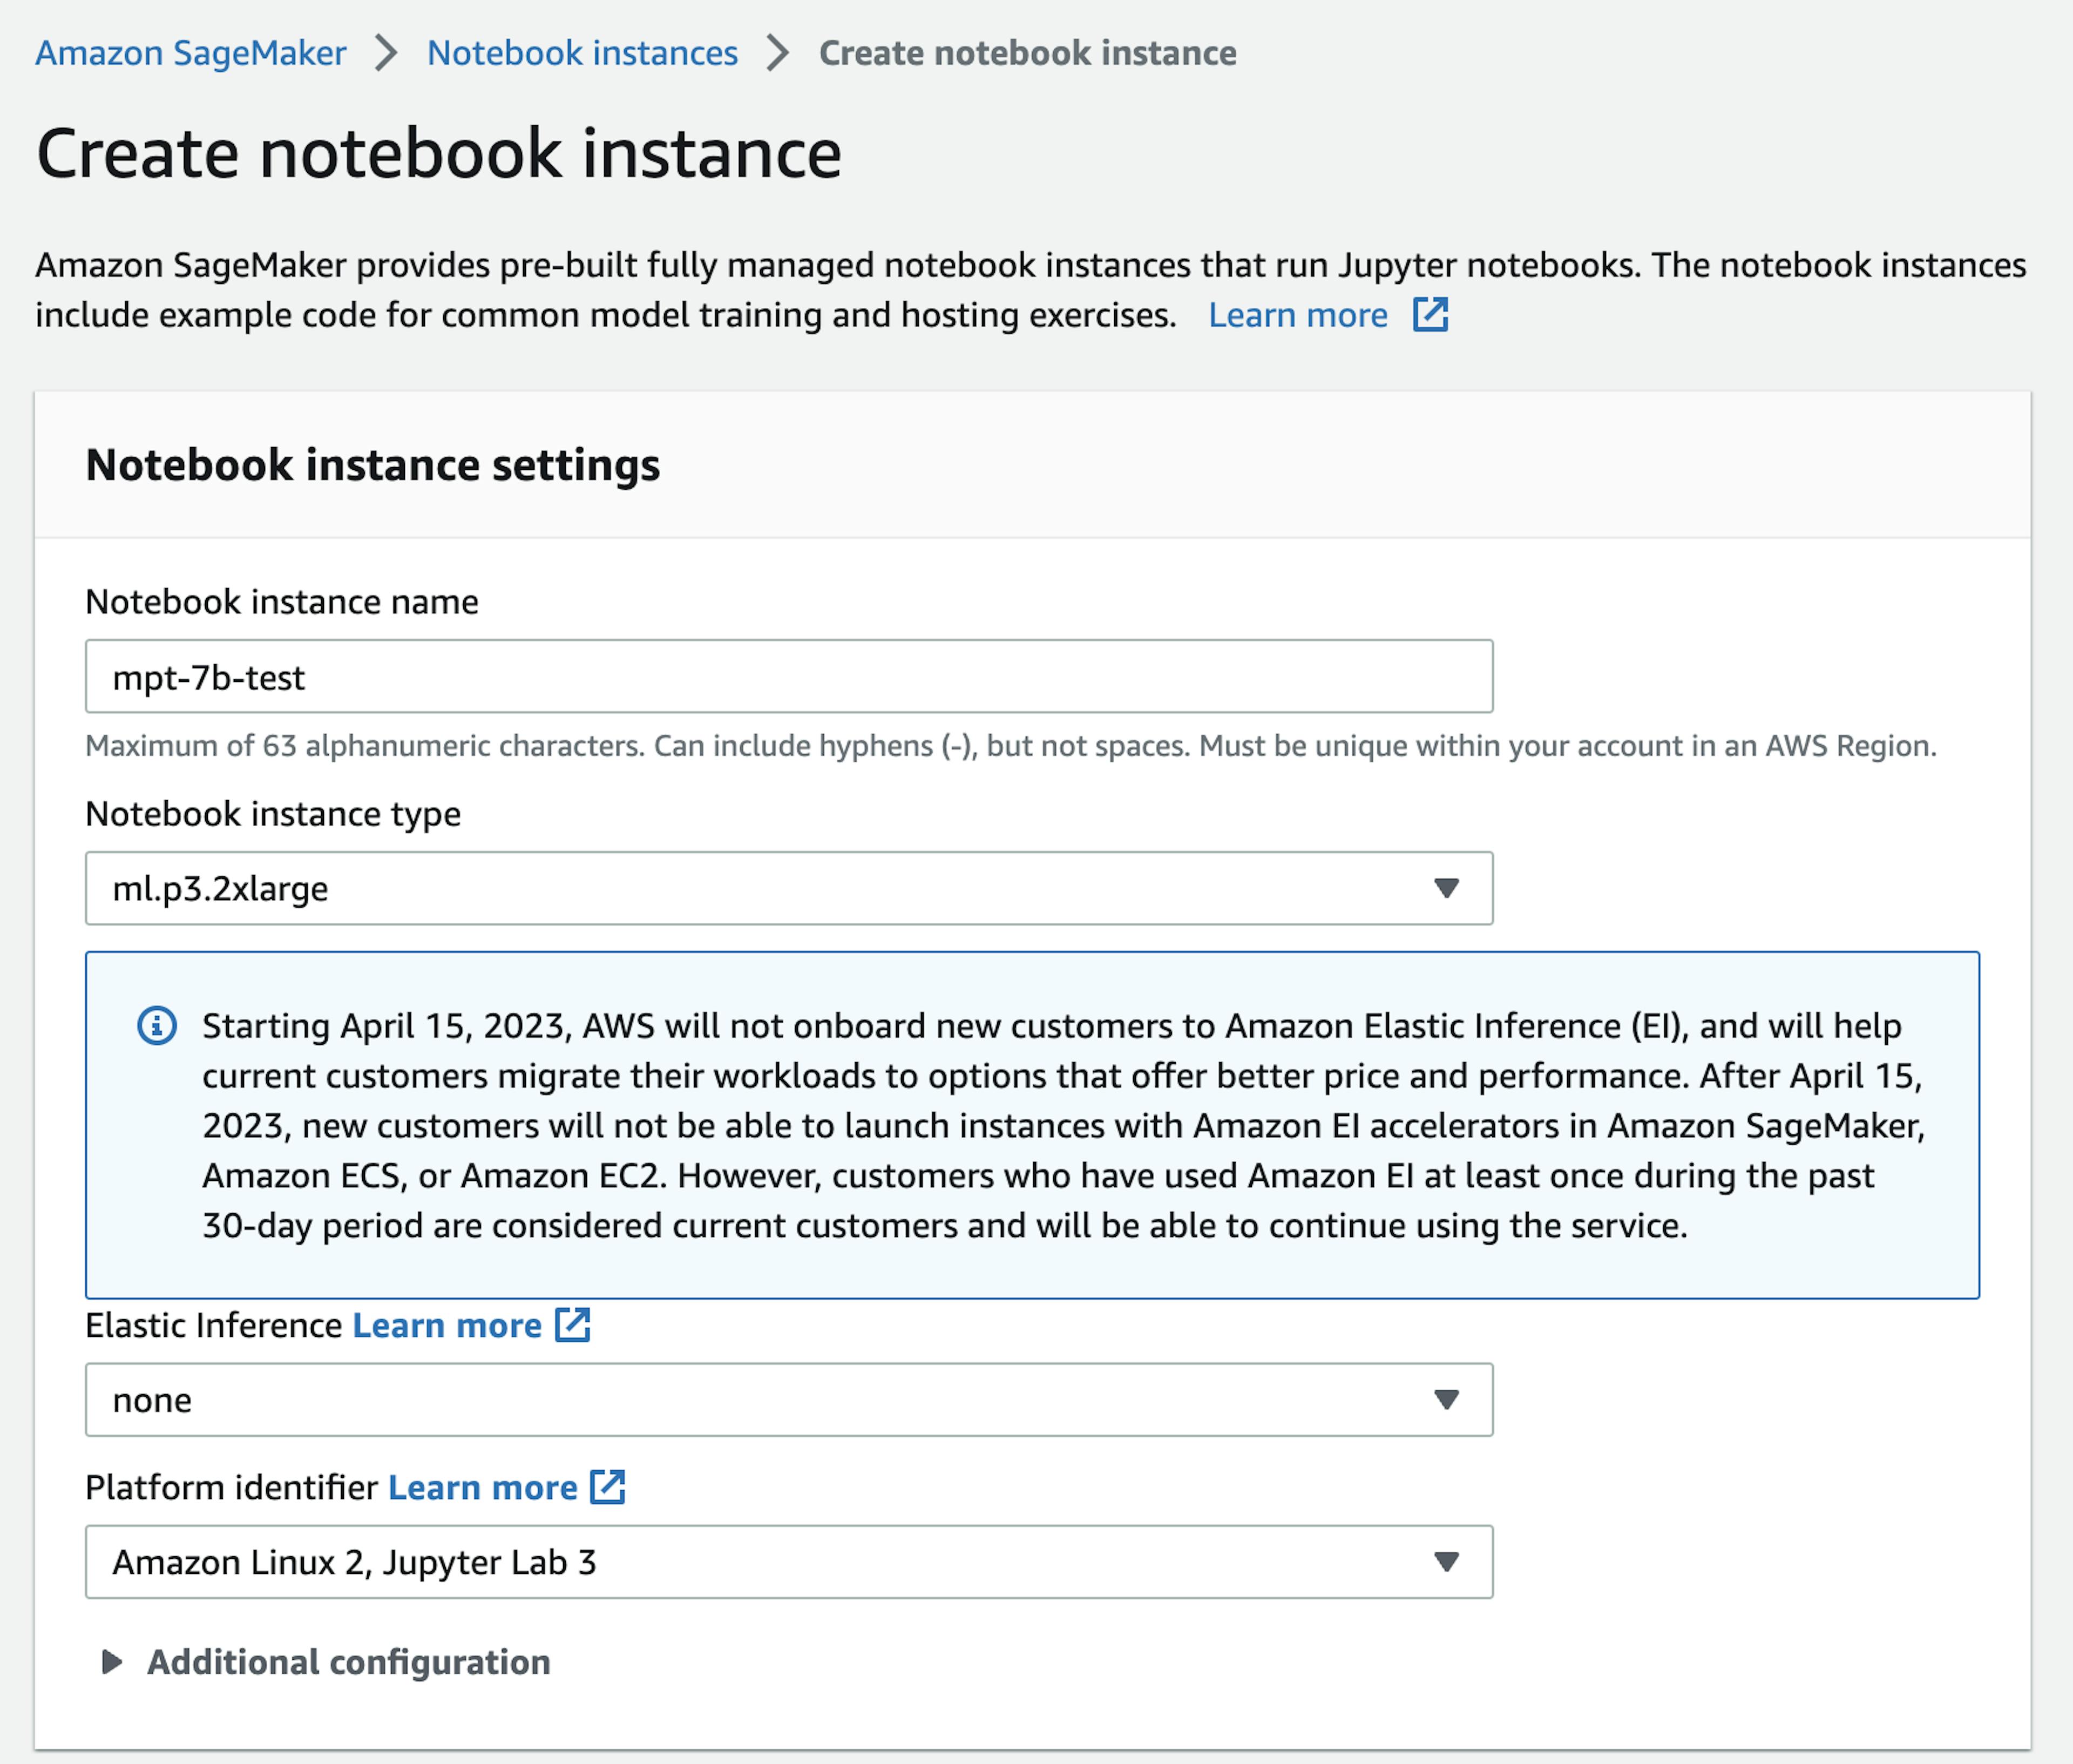 Specify notebook instance details. Image credit: Author